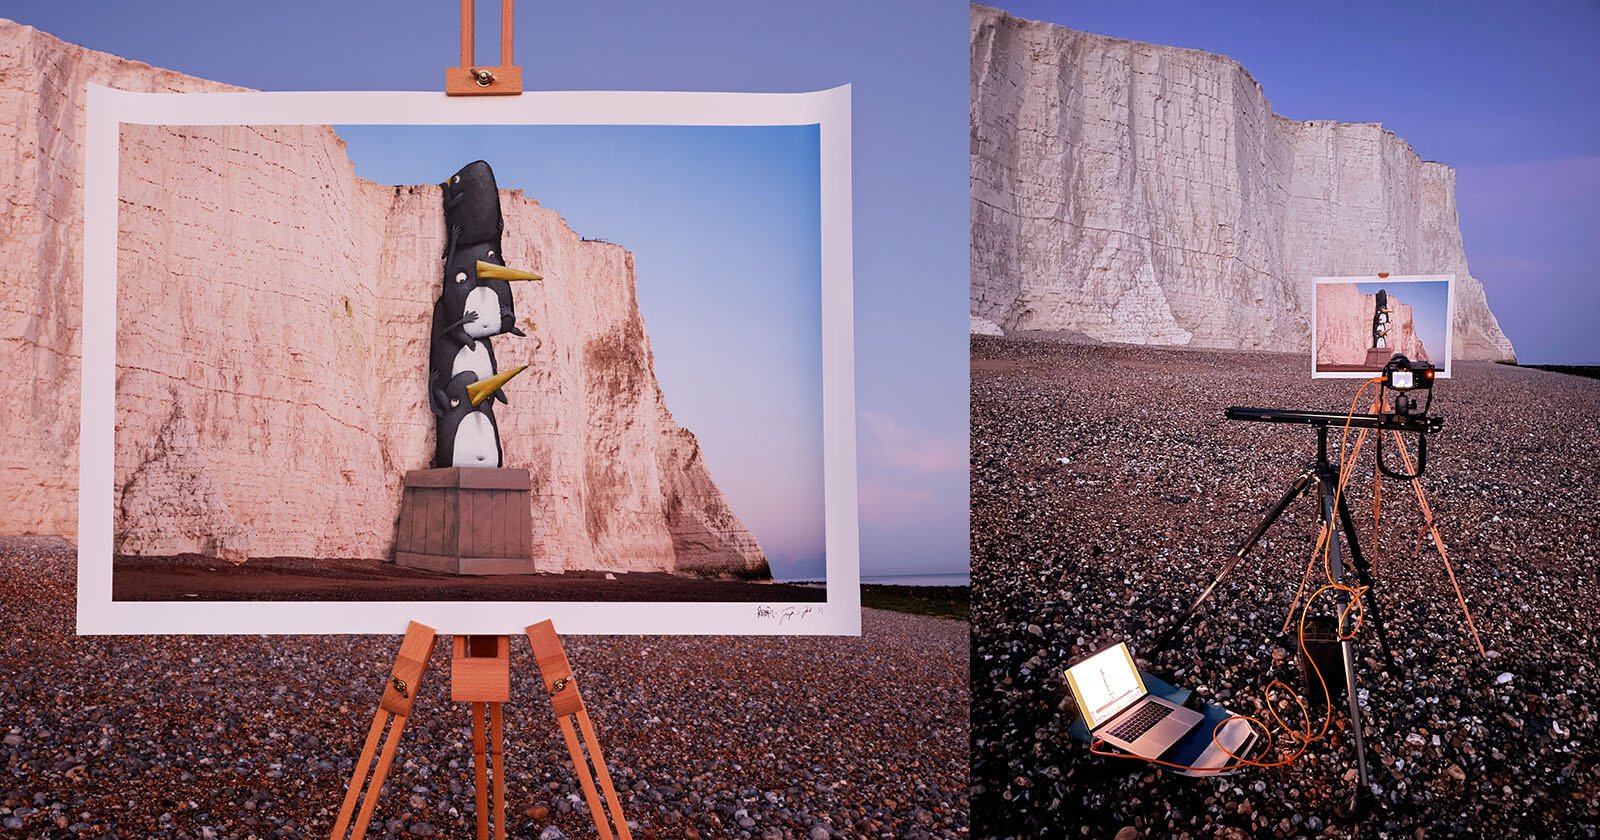 Photographer Cleverly Brings Street Art to Impossible Places